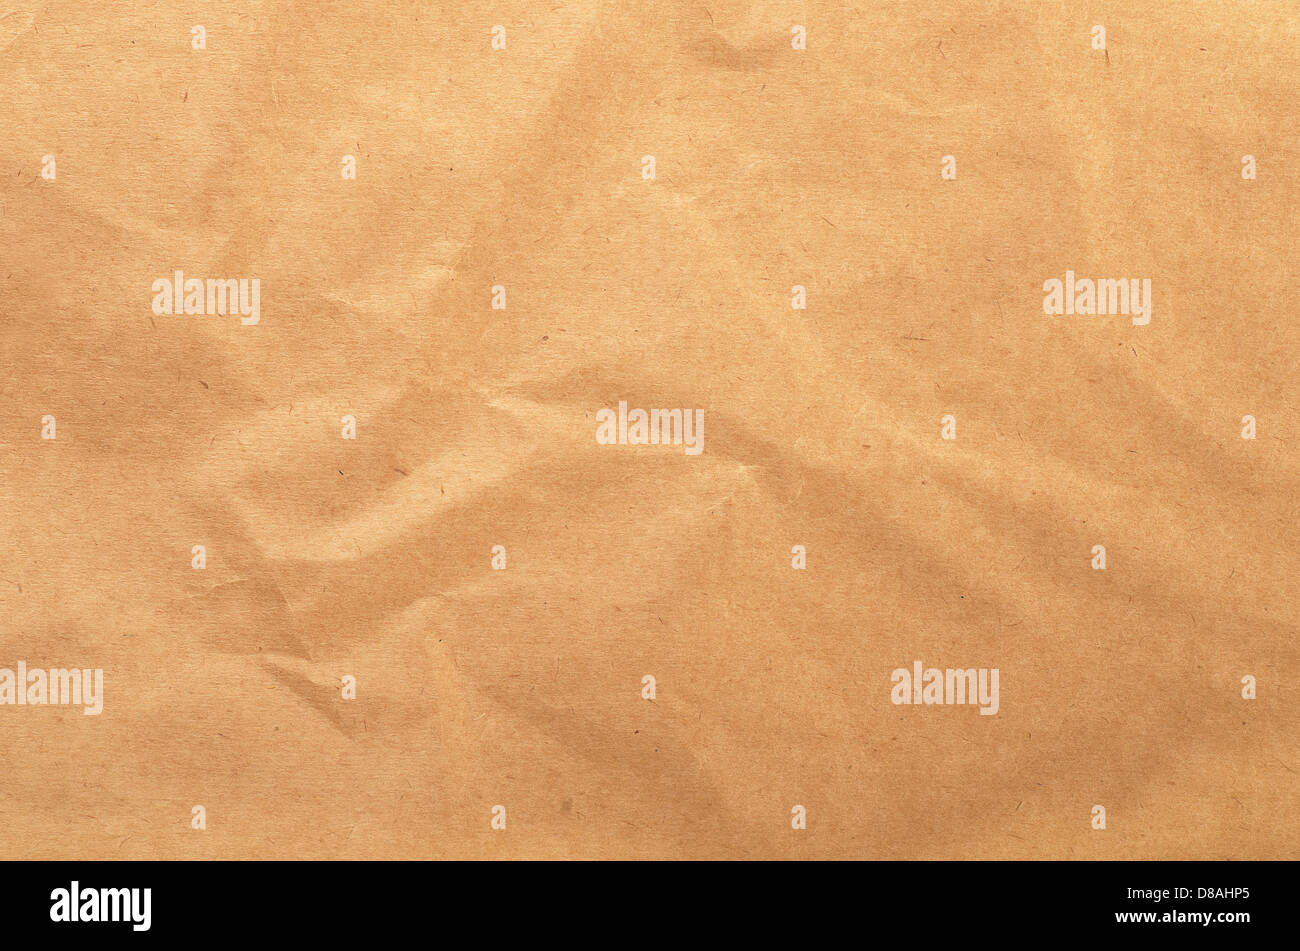 Brown rough crumpled recycled paper texture Stock Photo